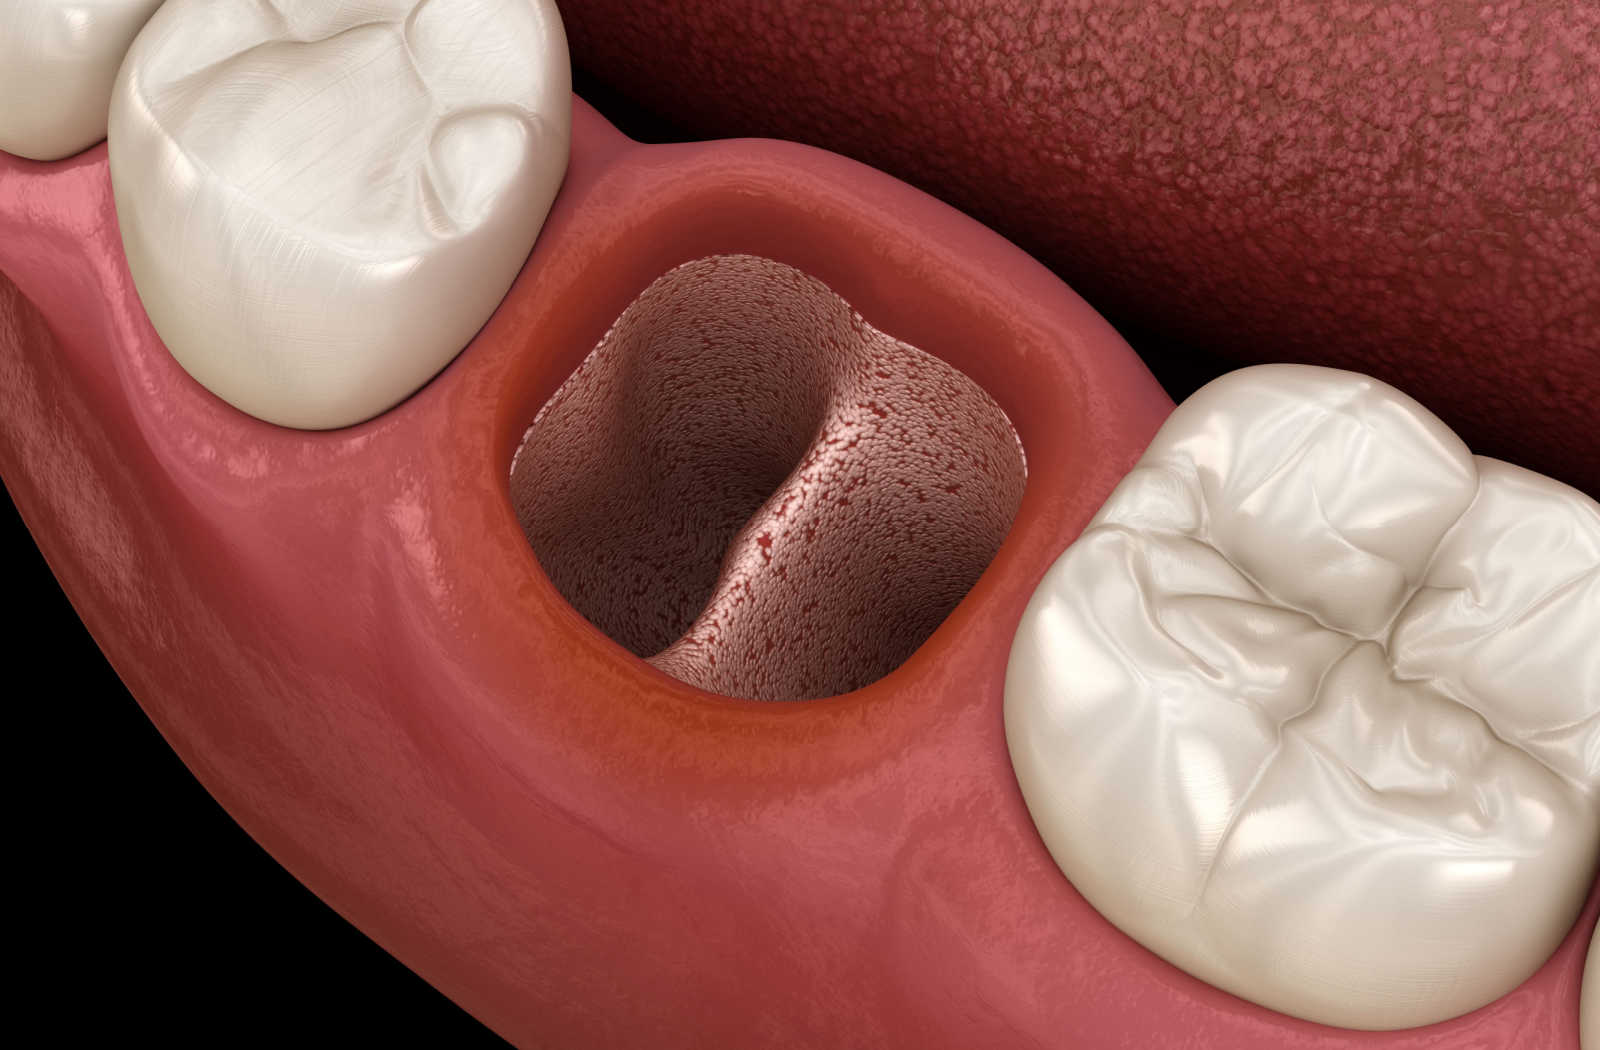 3D image of an open socket after tooth extraction.